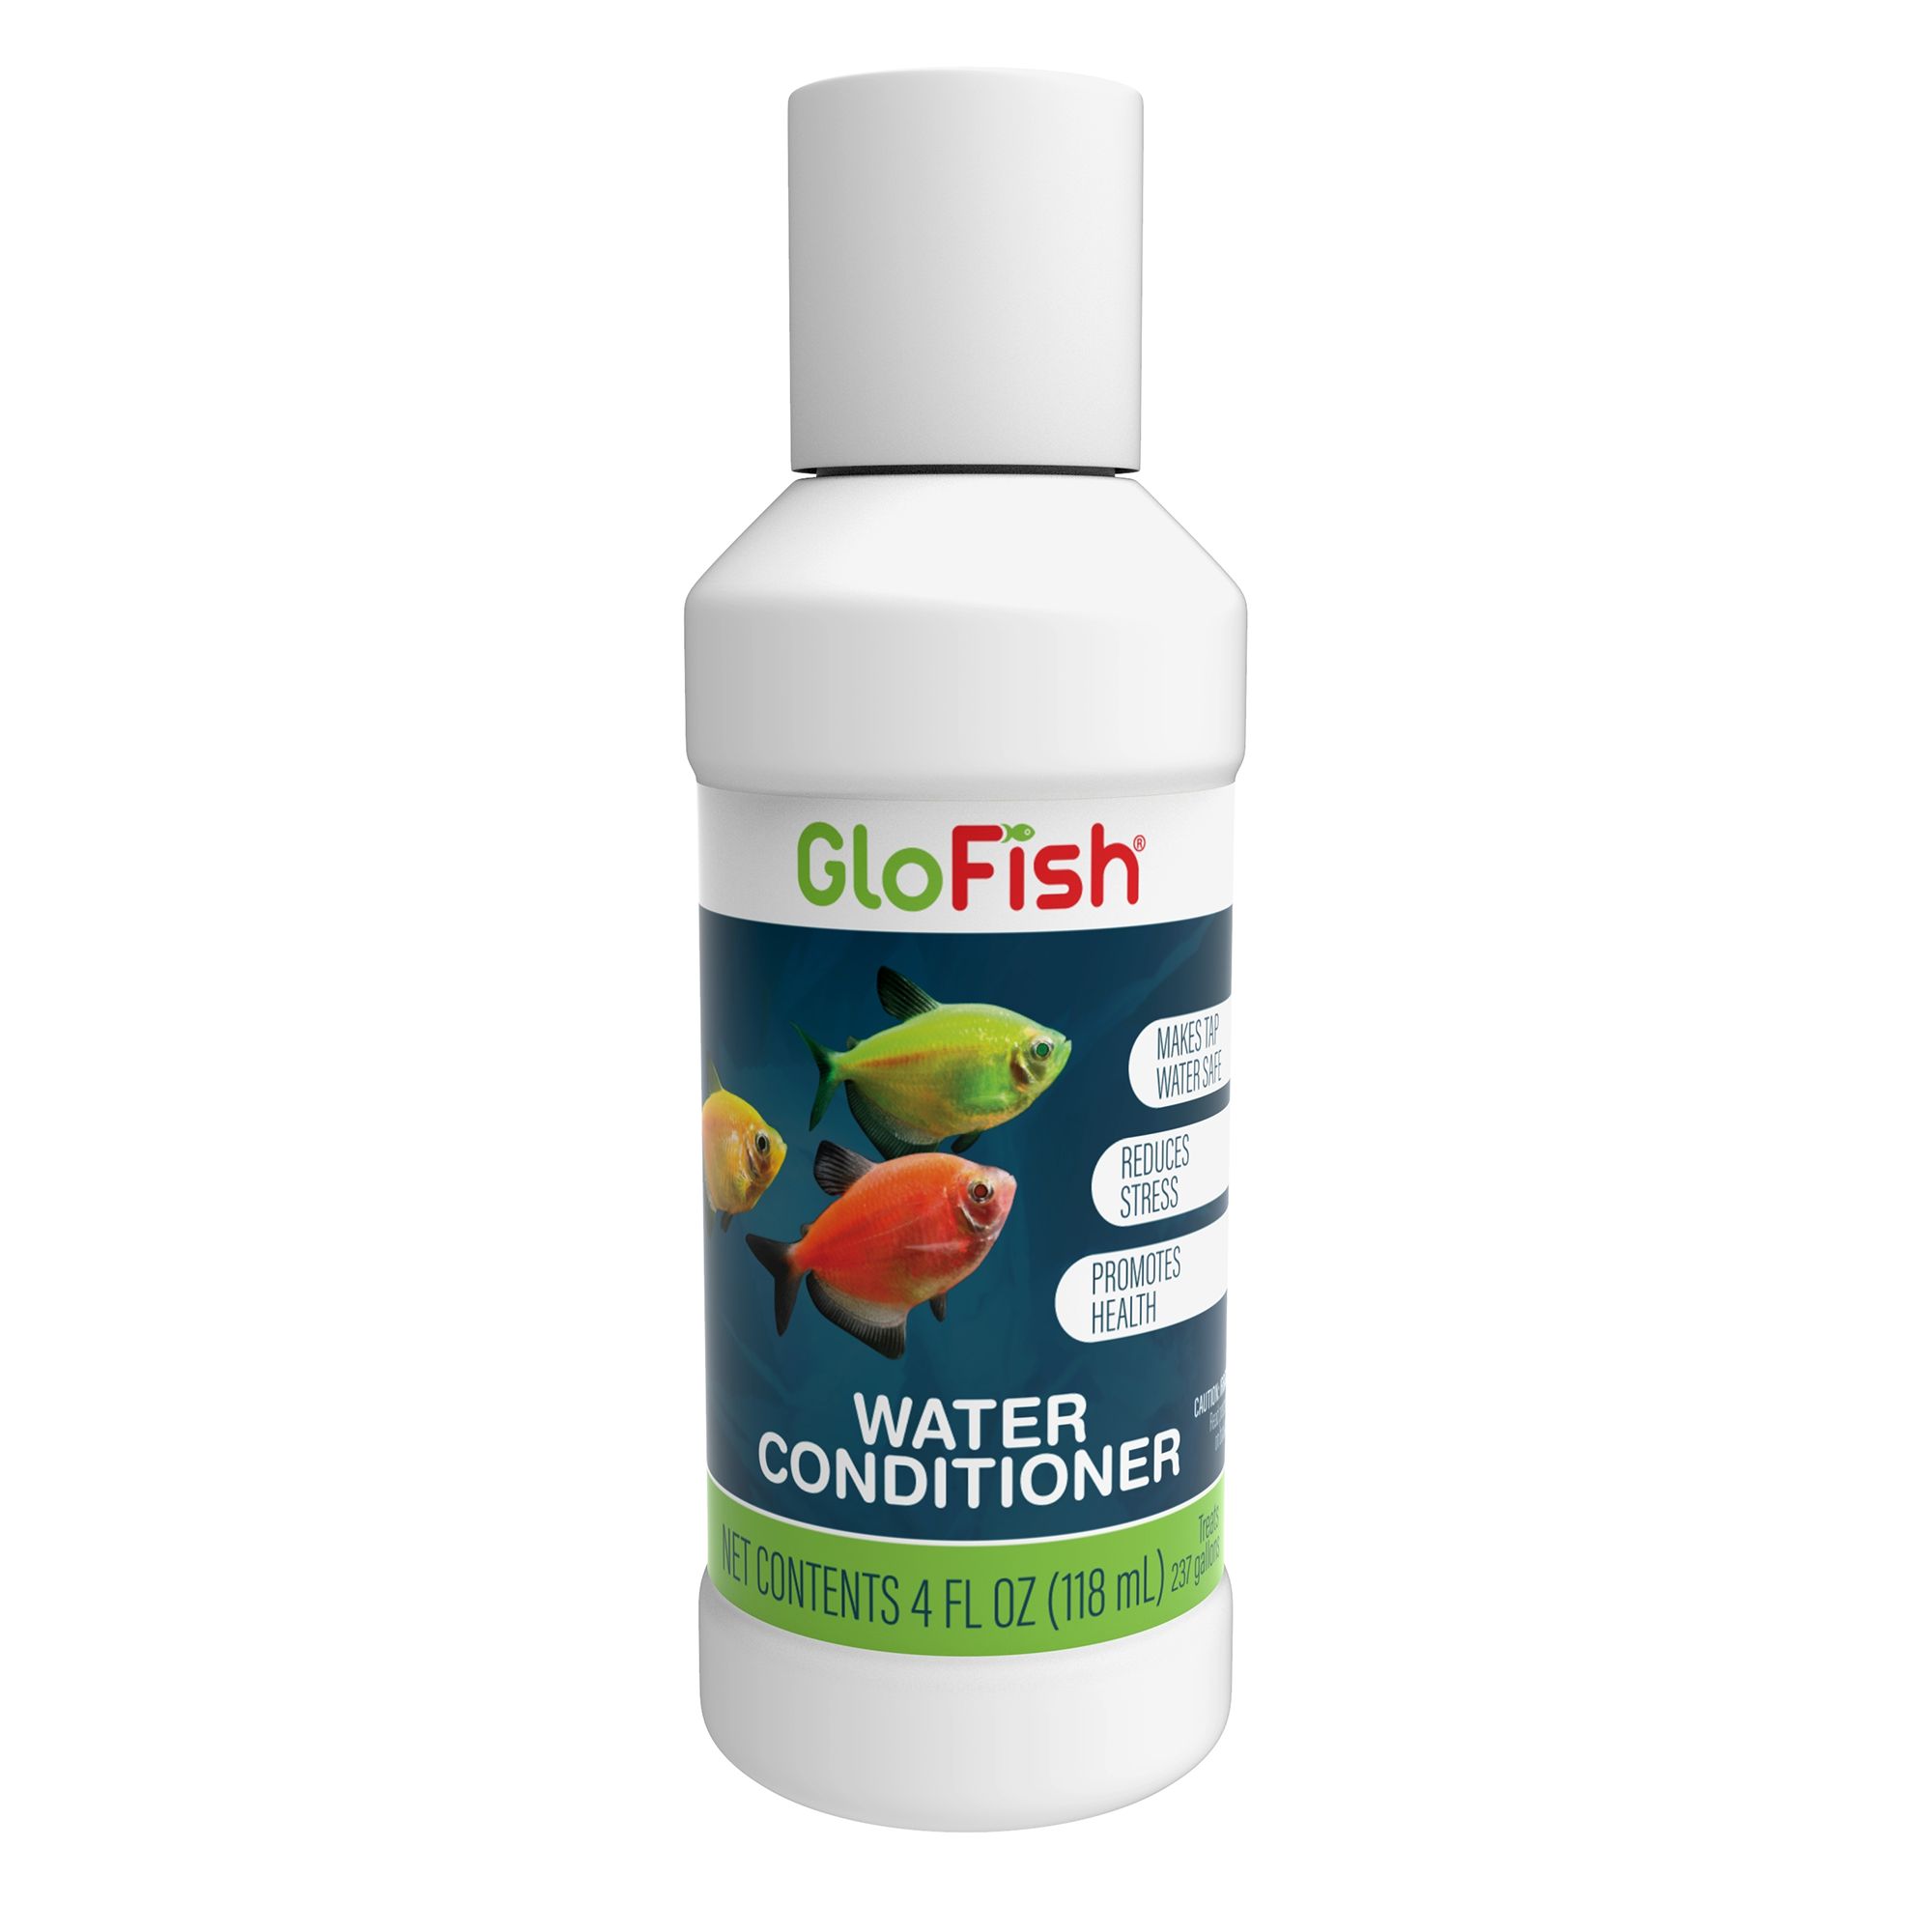 shop water care & conditioning